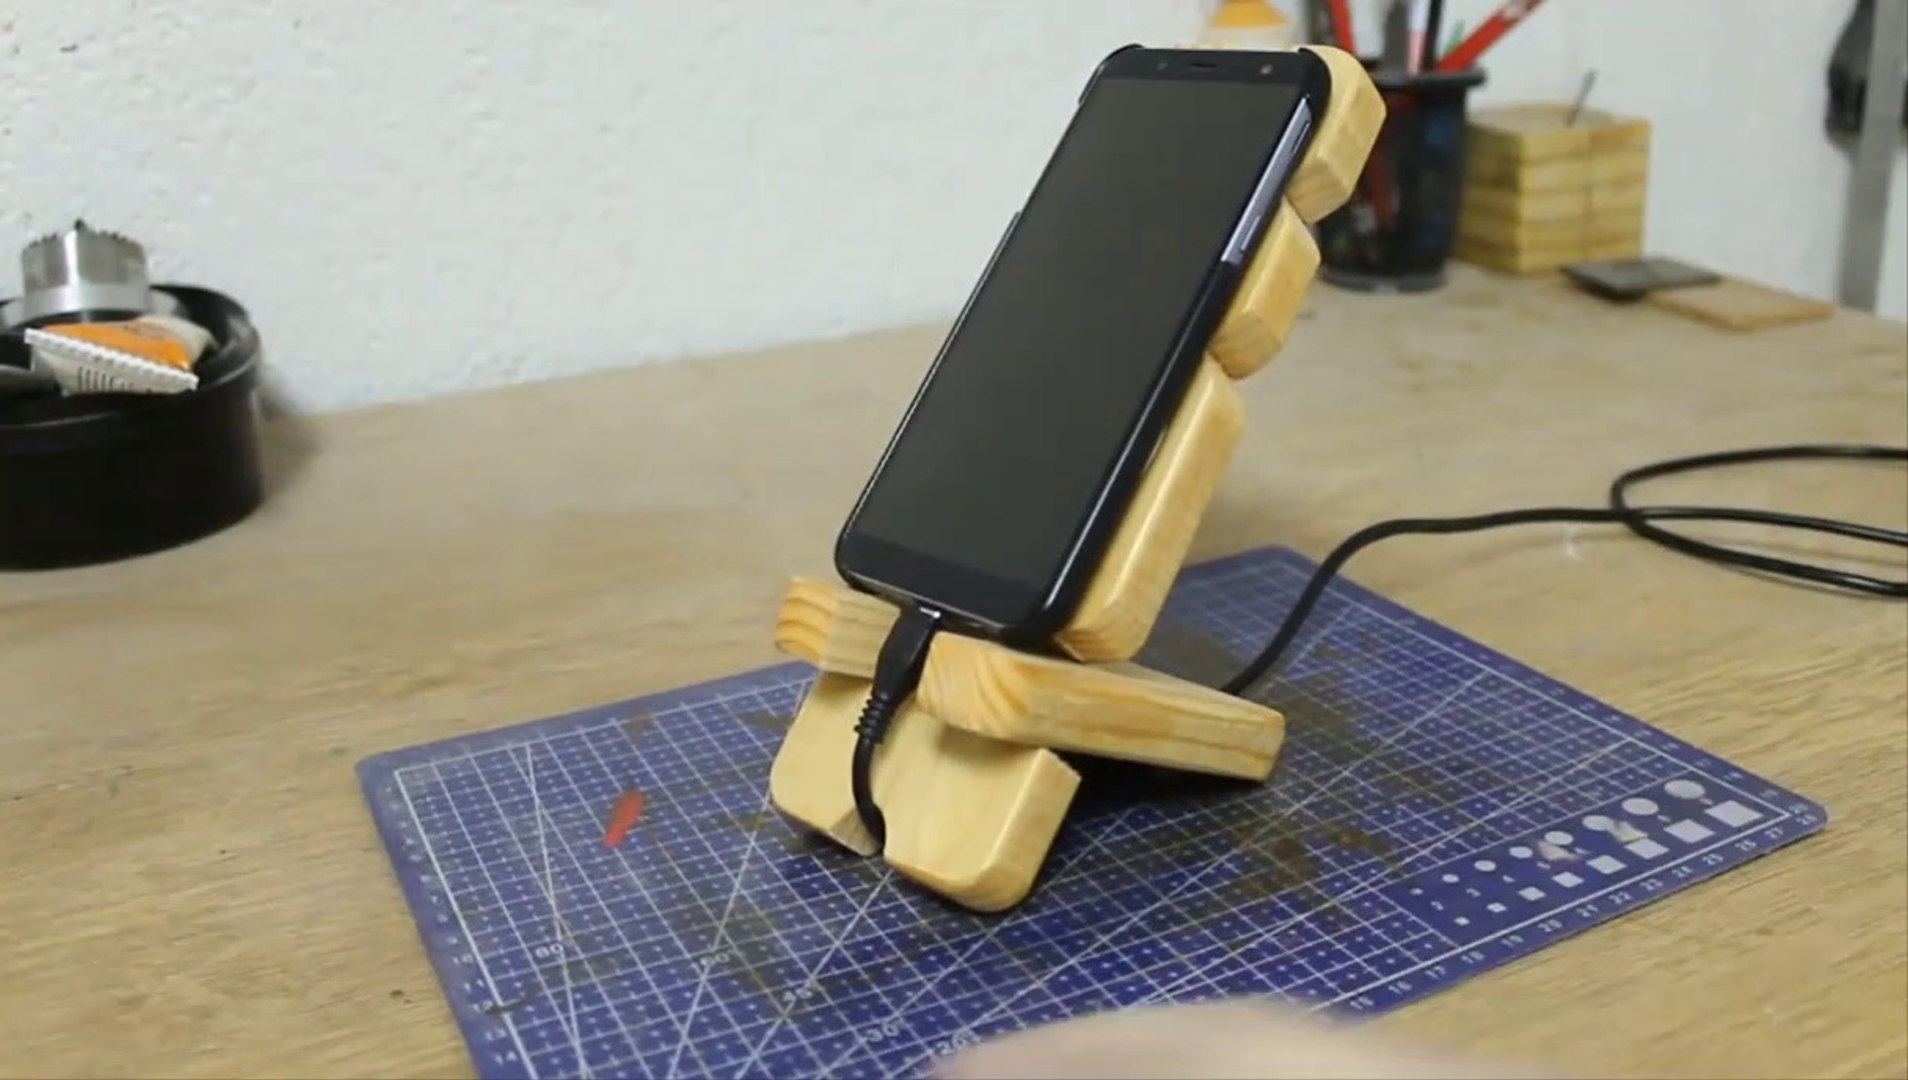 phone and watch charging station-DIY phone dock station - video Dailymotion